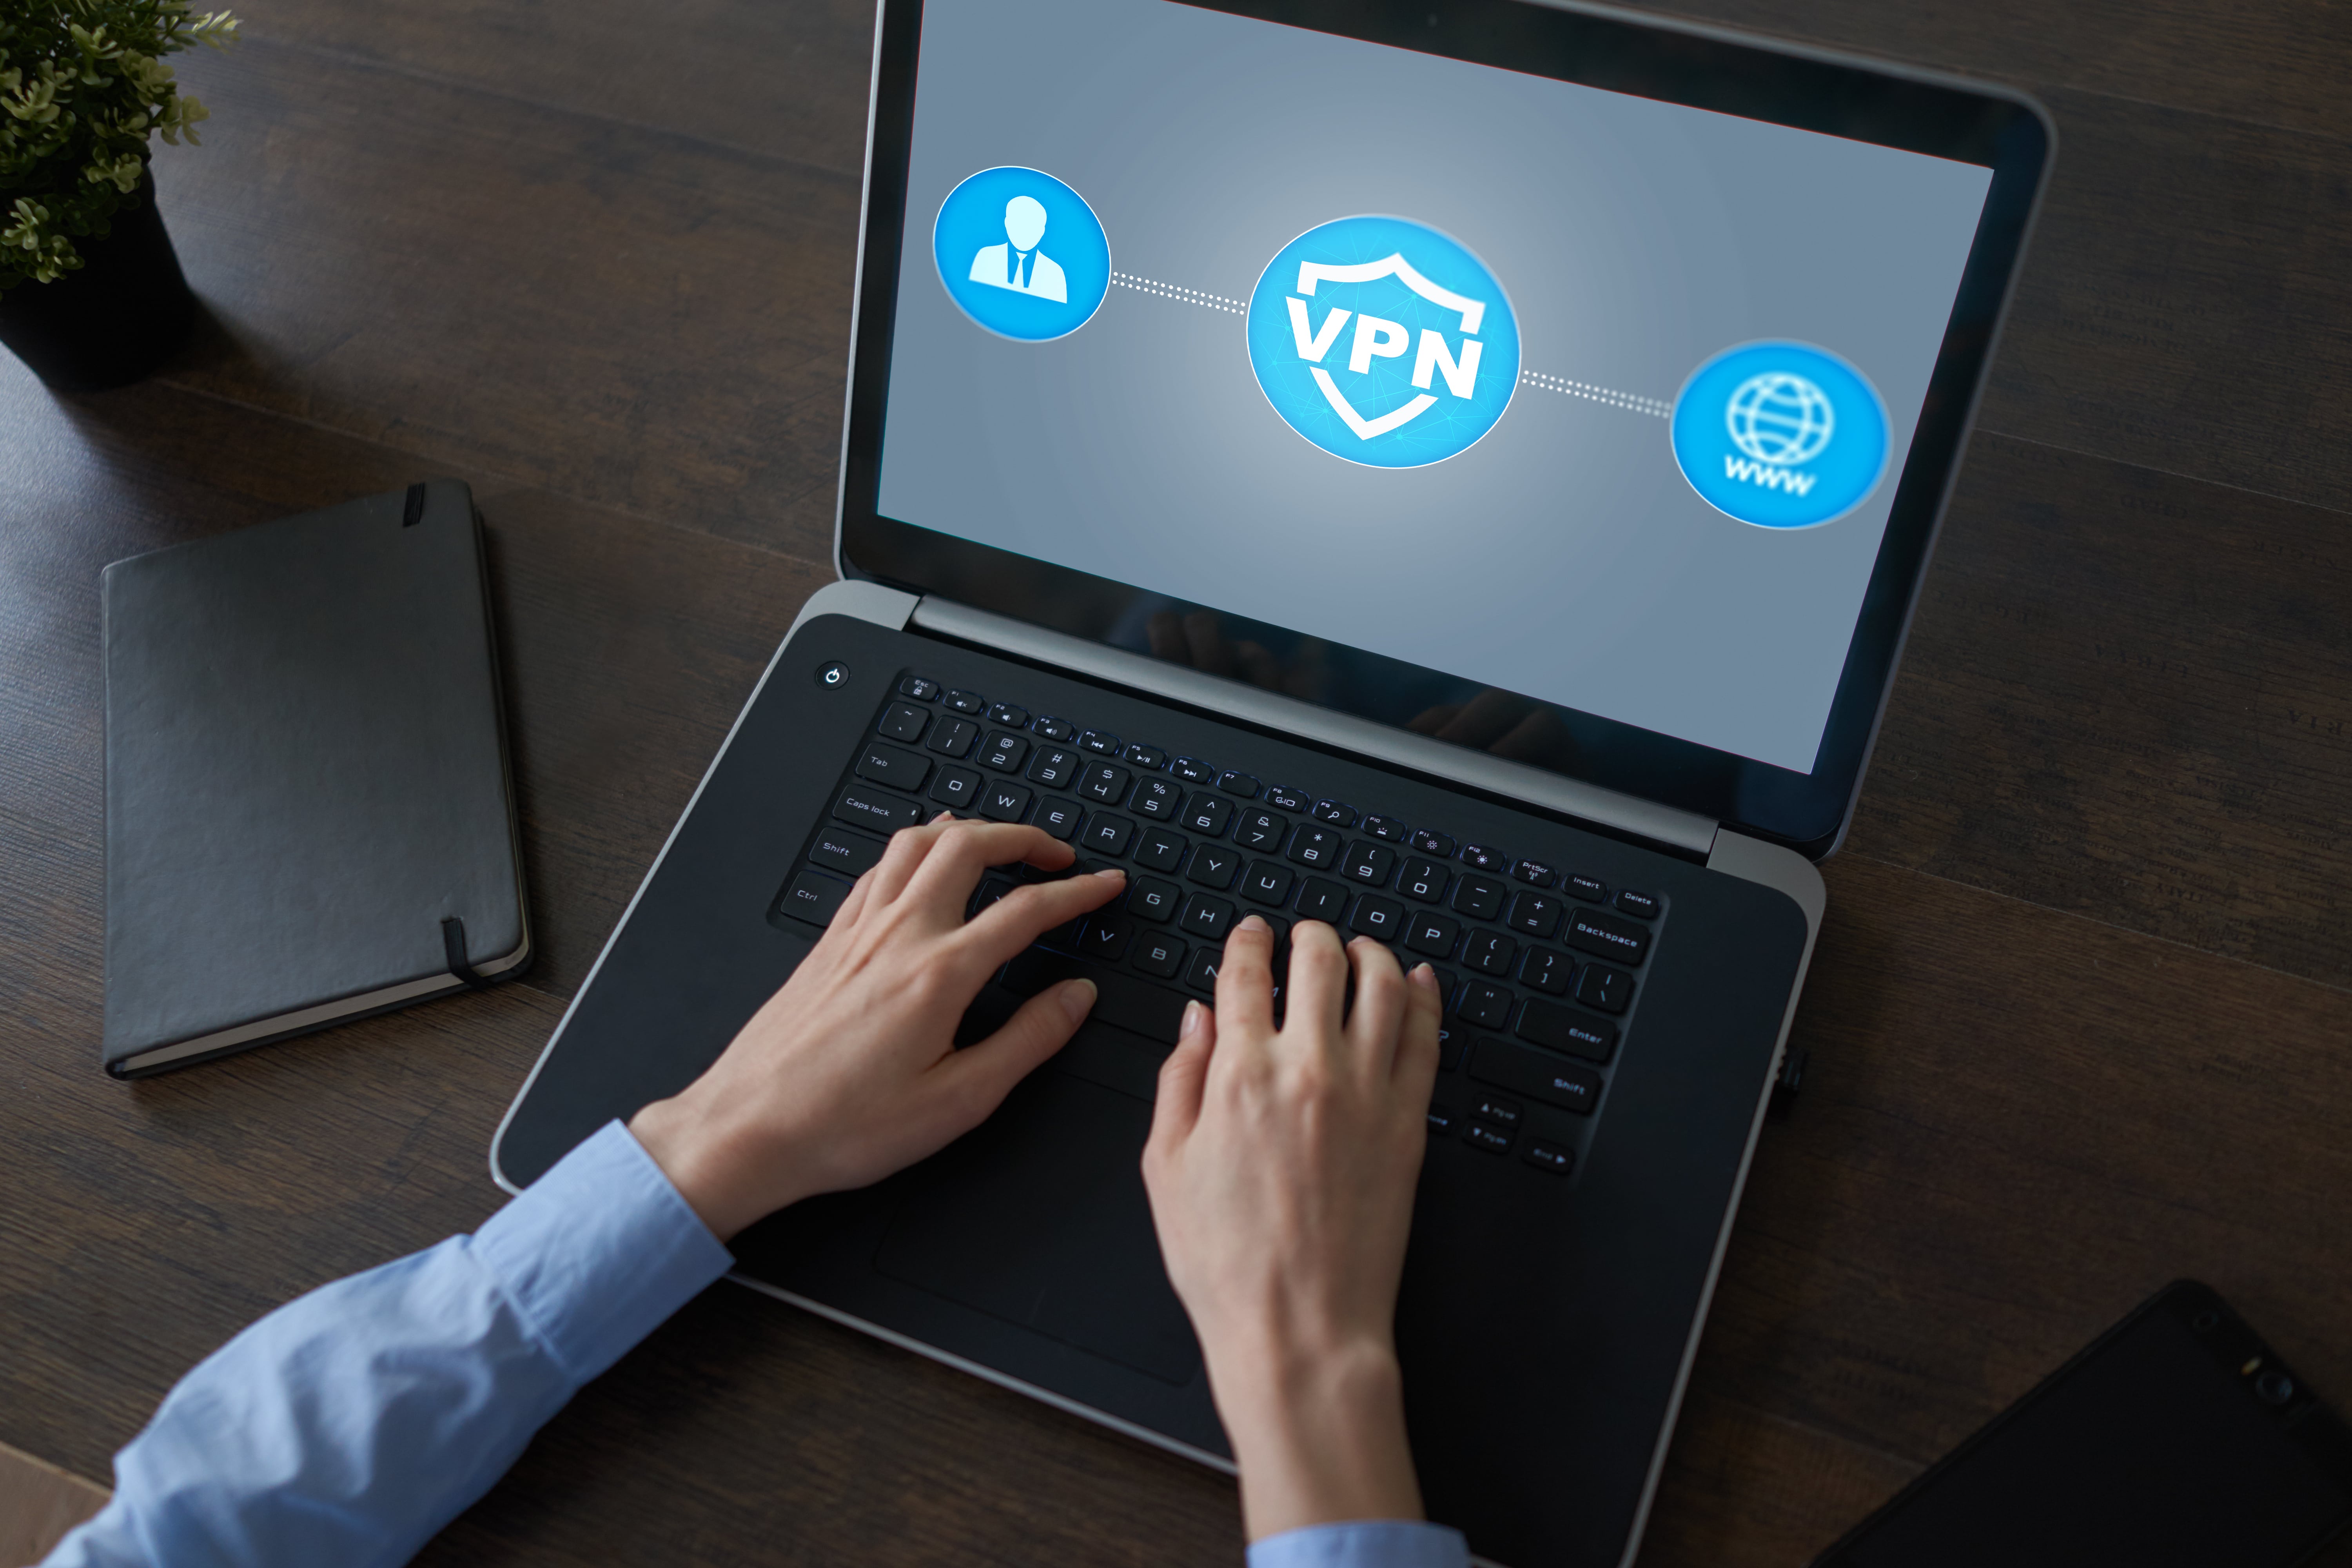 Something about virtual private network (VPN) troubleshooting